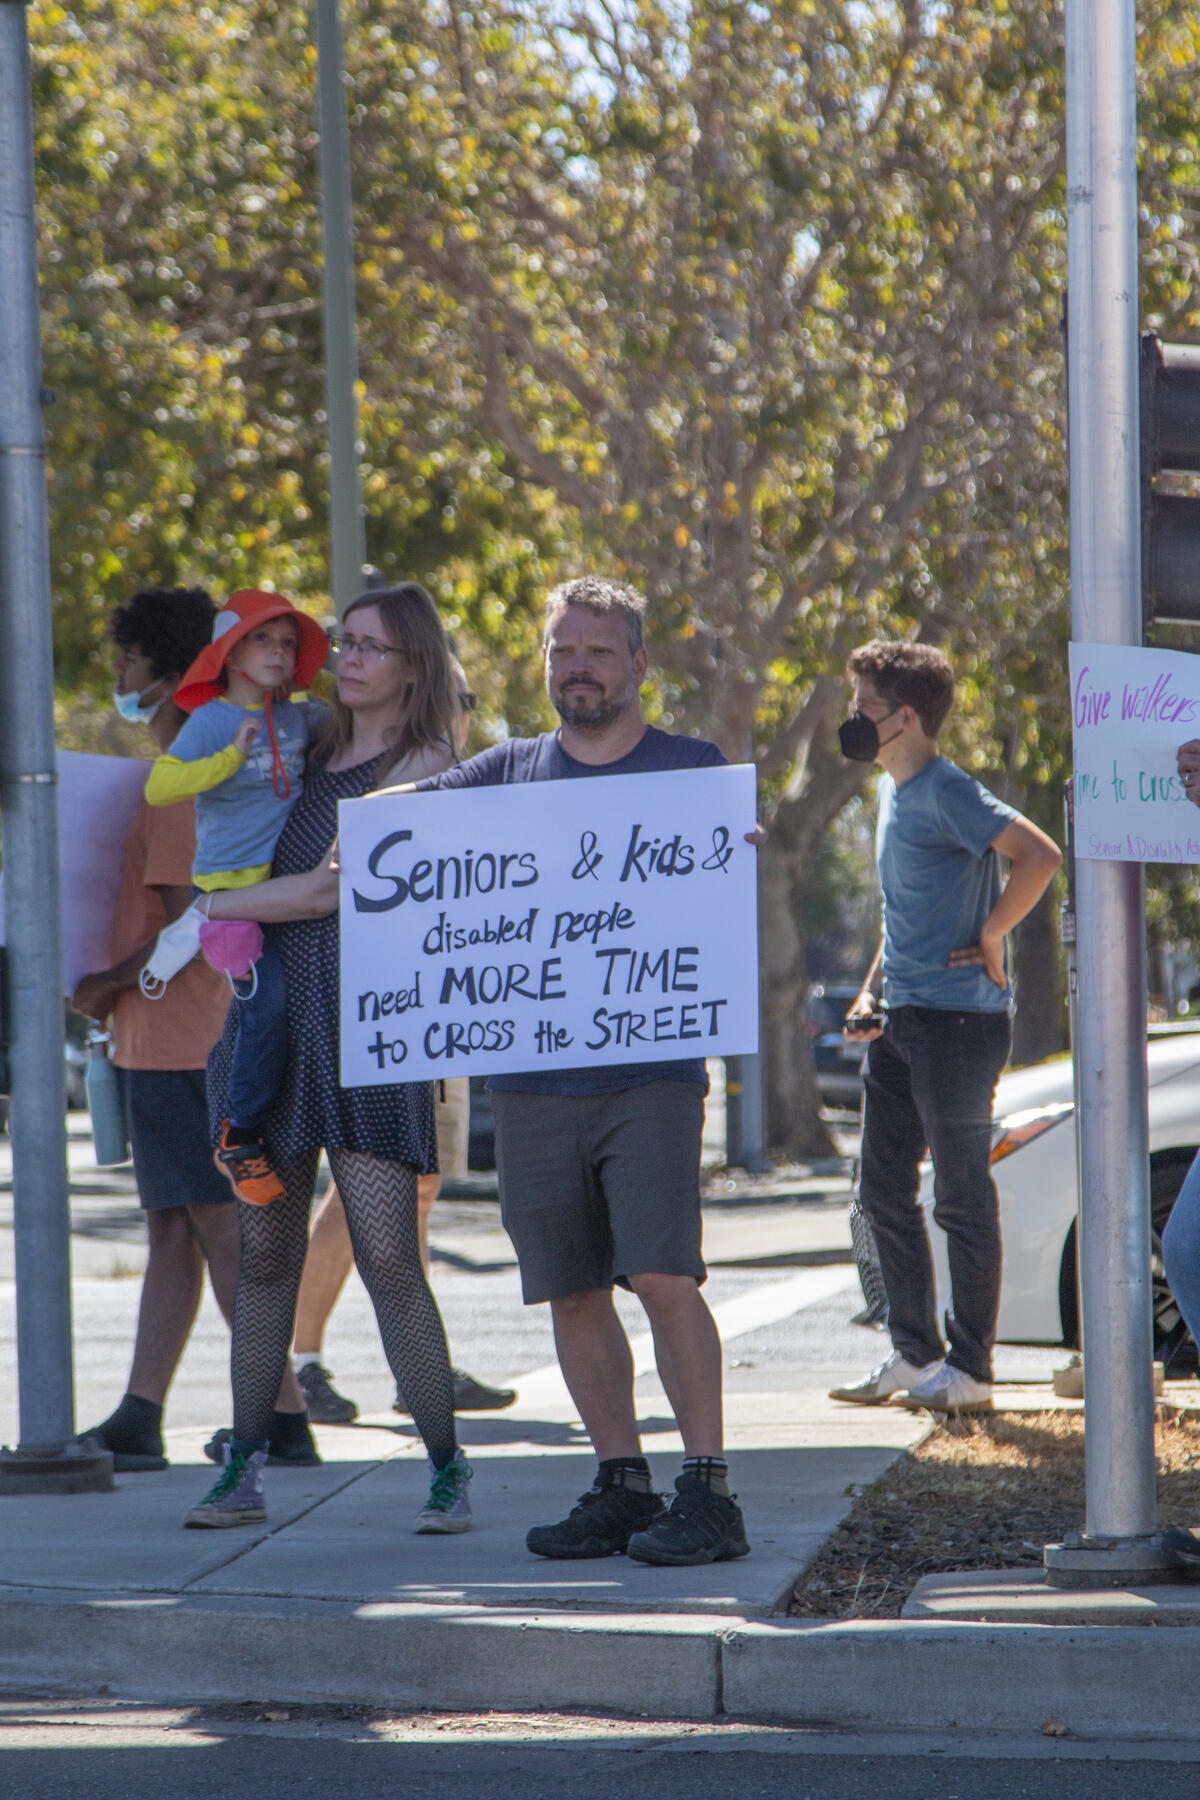 An activist holds a sign "Seniors & kids & disabled people need more time to cross the street."